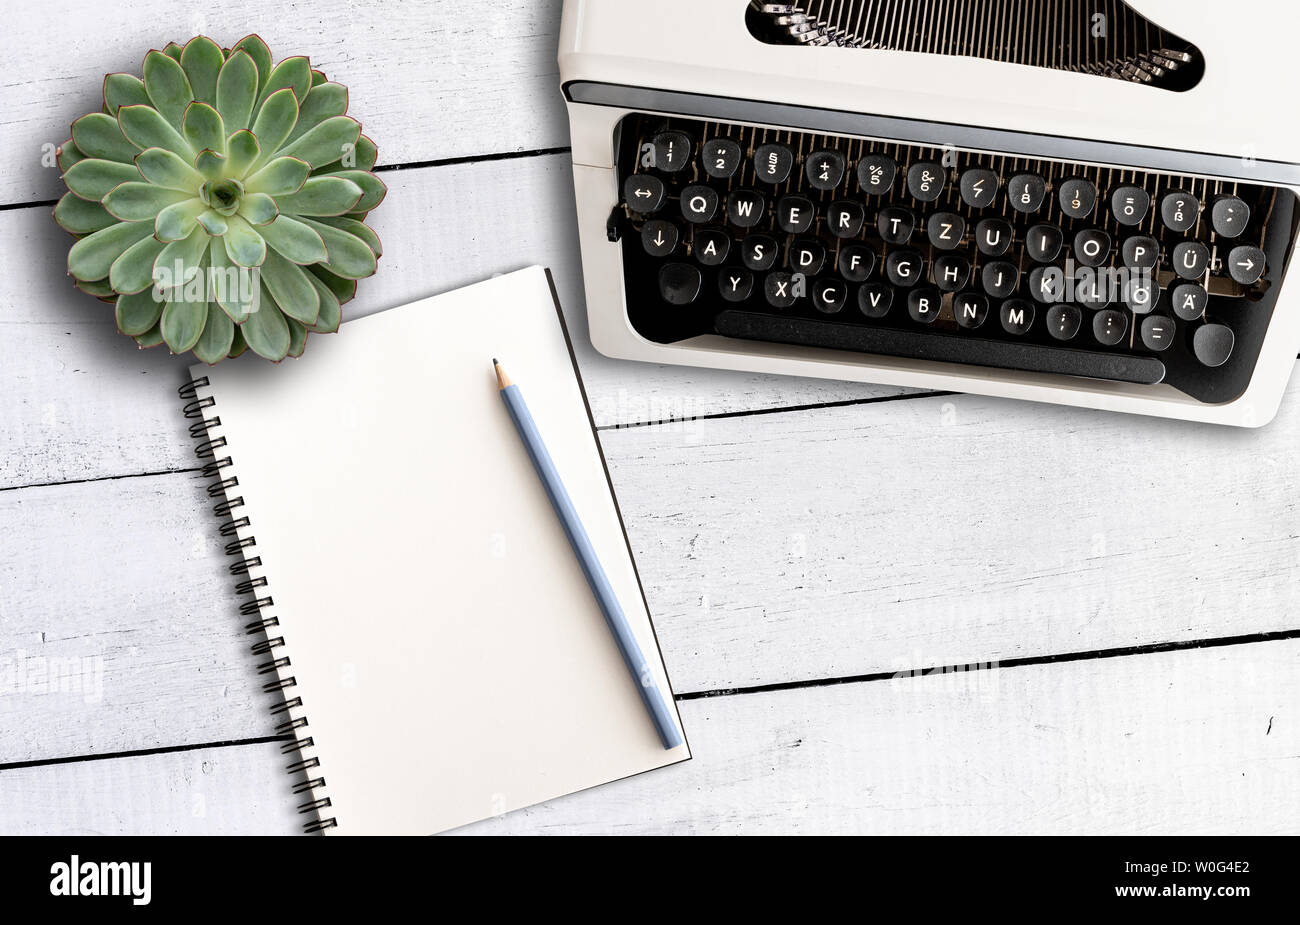 top view of old typewriter, note pad and potted plant on rustic white wooden desk Stock Photo